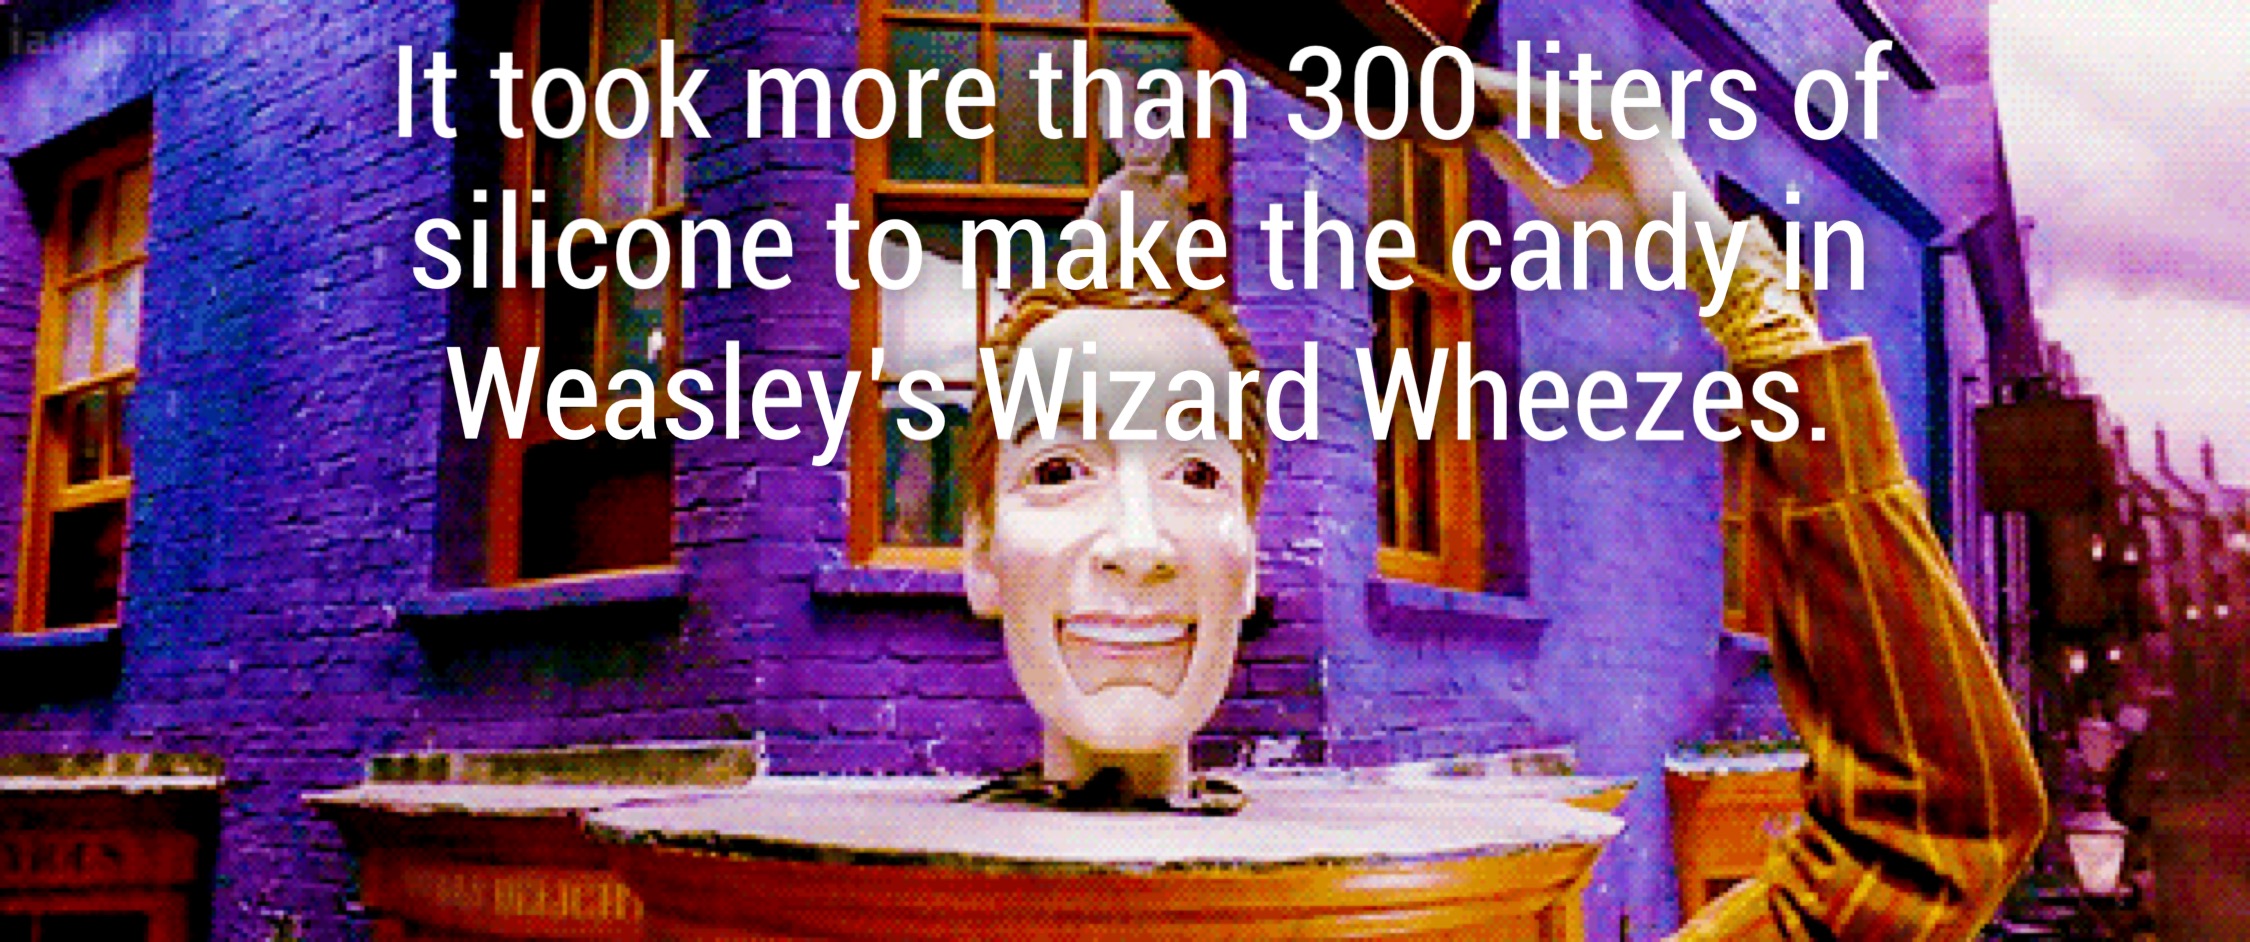 religion - It took more than 300 liters of silicone to make the candy in Weasley'sWizard Wheezes.